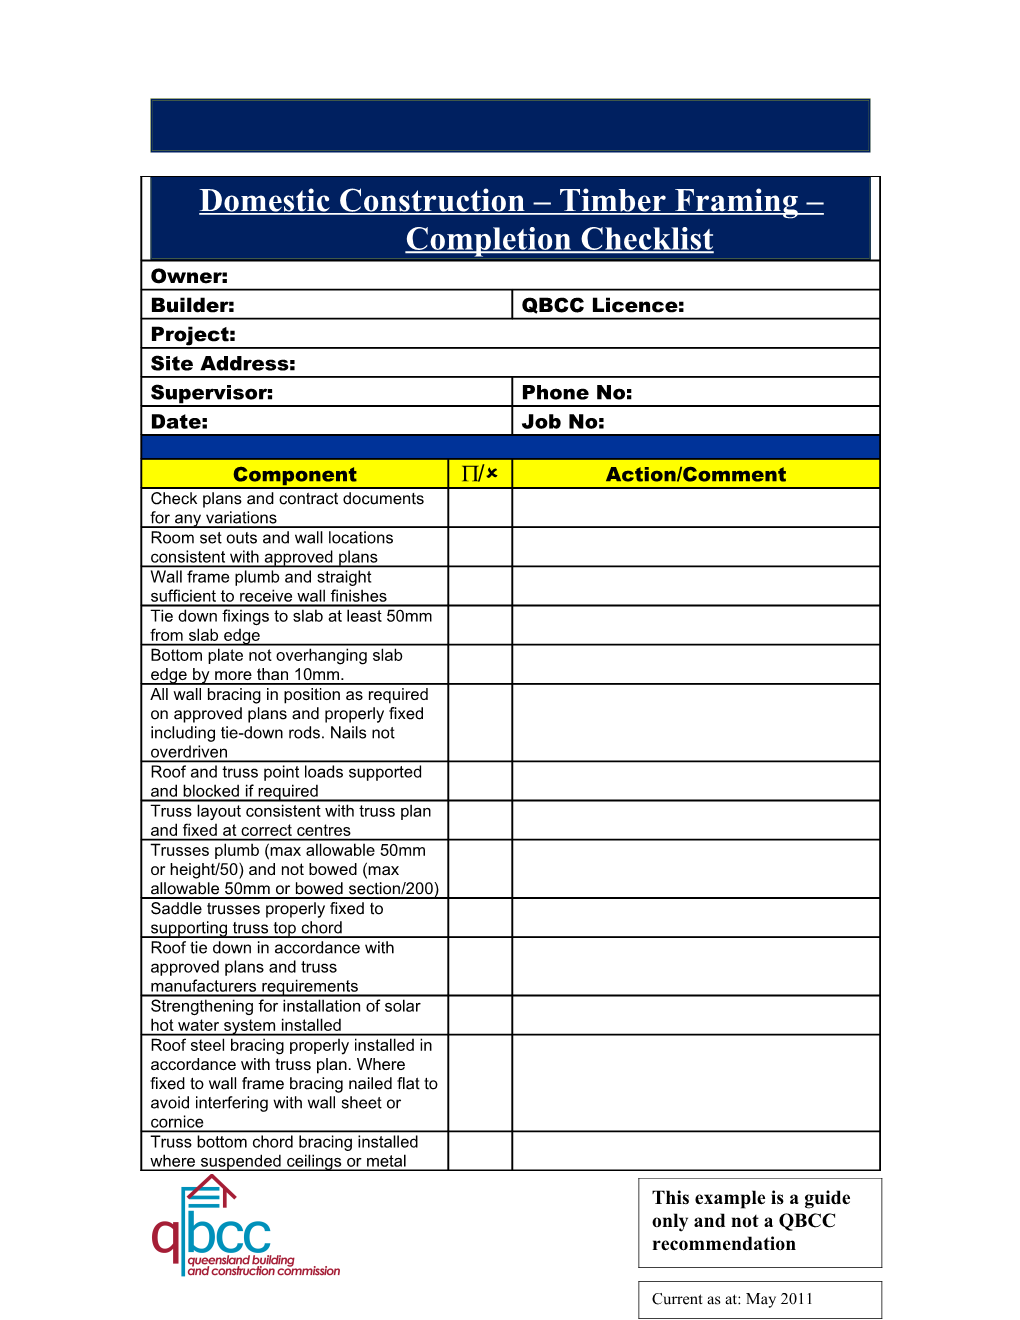 Domestic Construction Timber Framing Completion Checklist